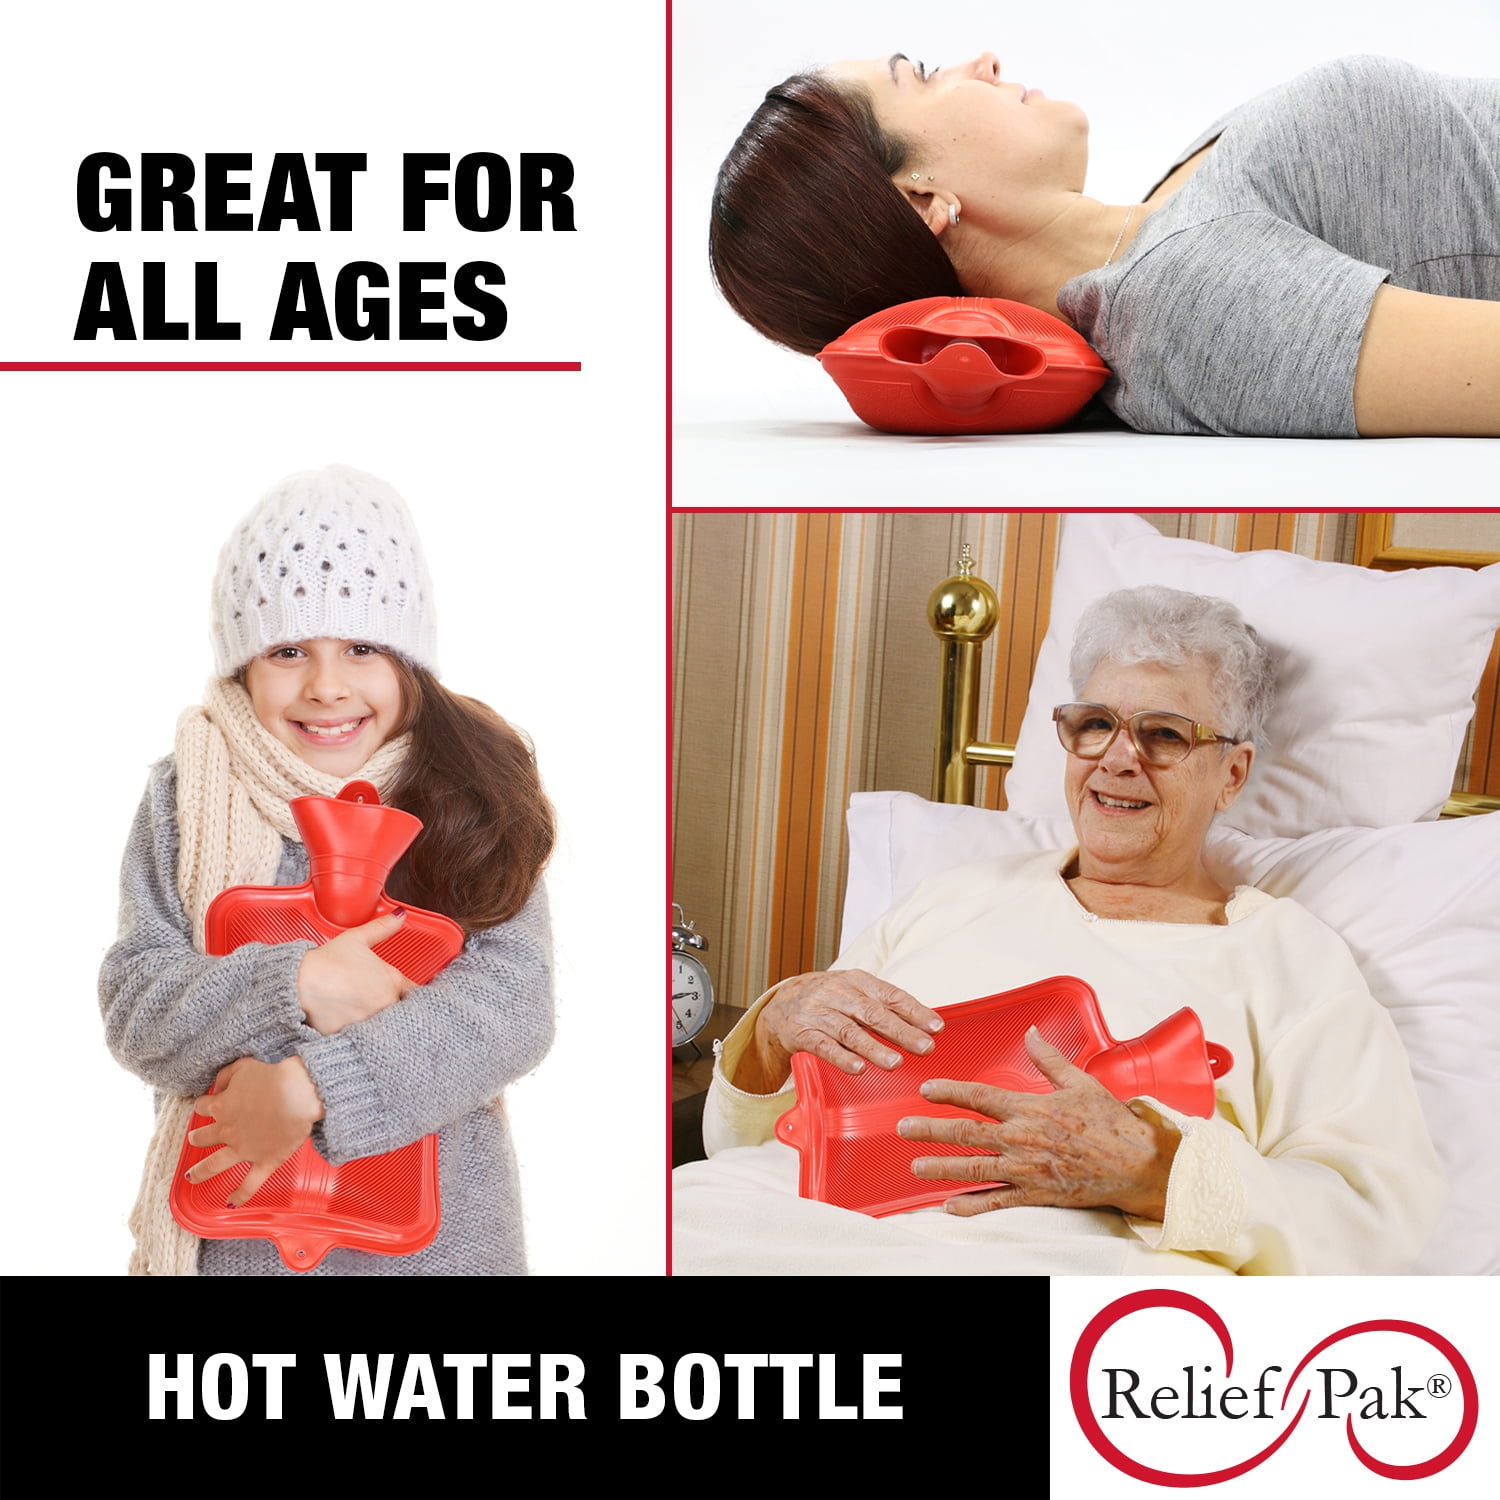 Handy Solutions Rubber Hot Water Bottle for Pain Management, 2 qt Capacity  